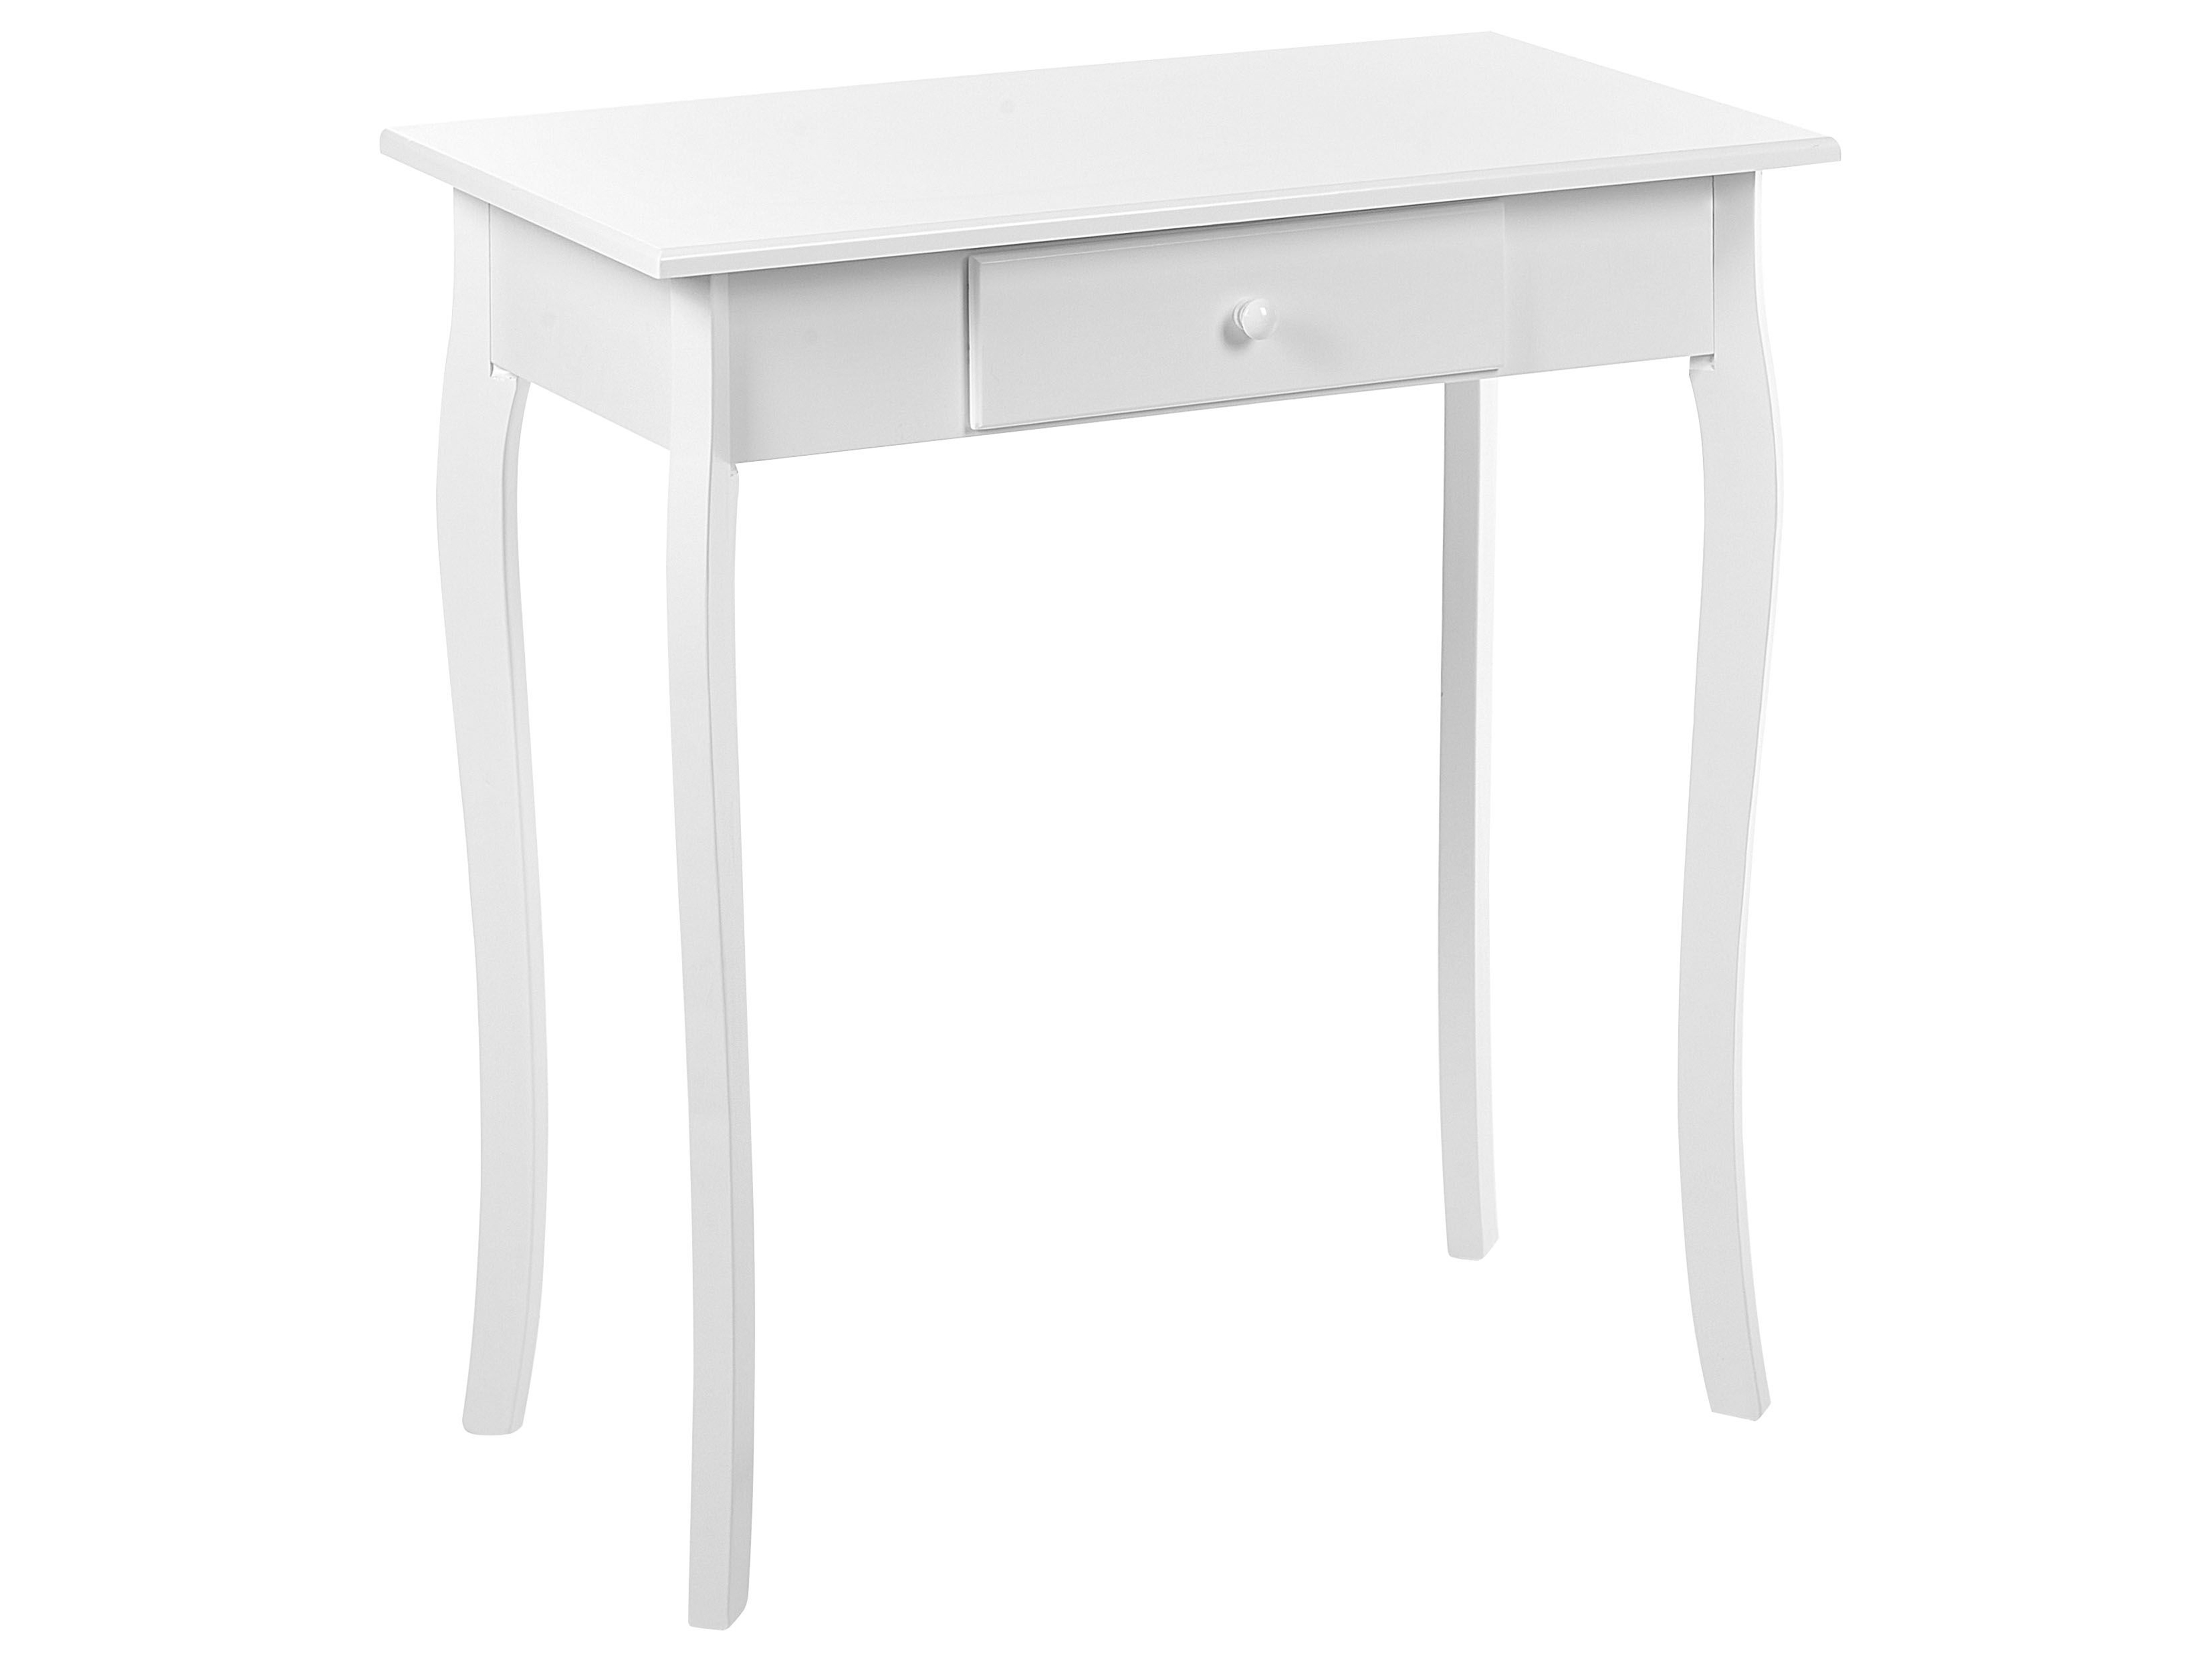 Sidetable 1 lade wit ALBIA